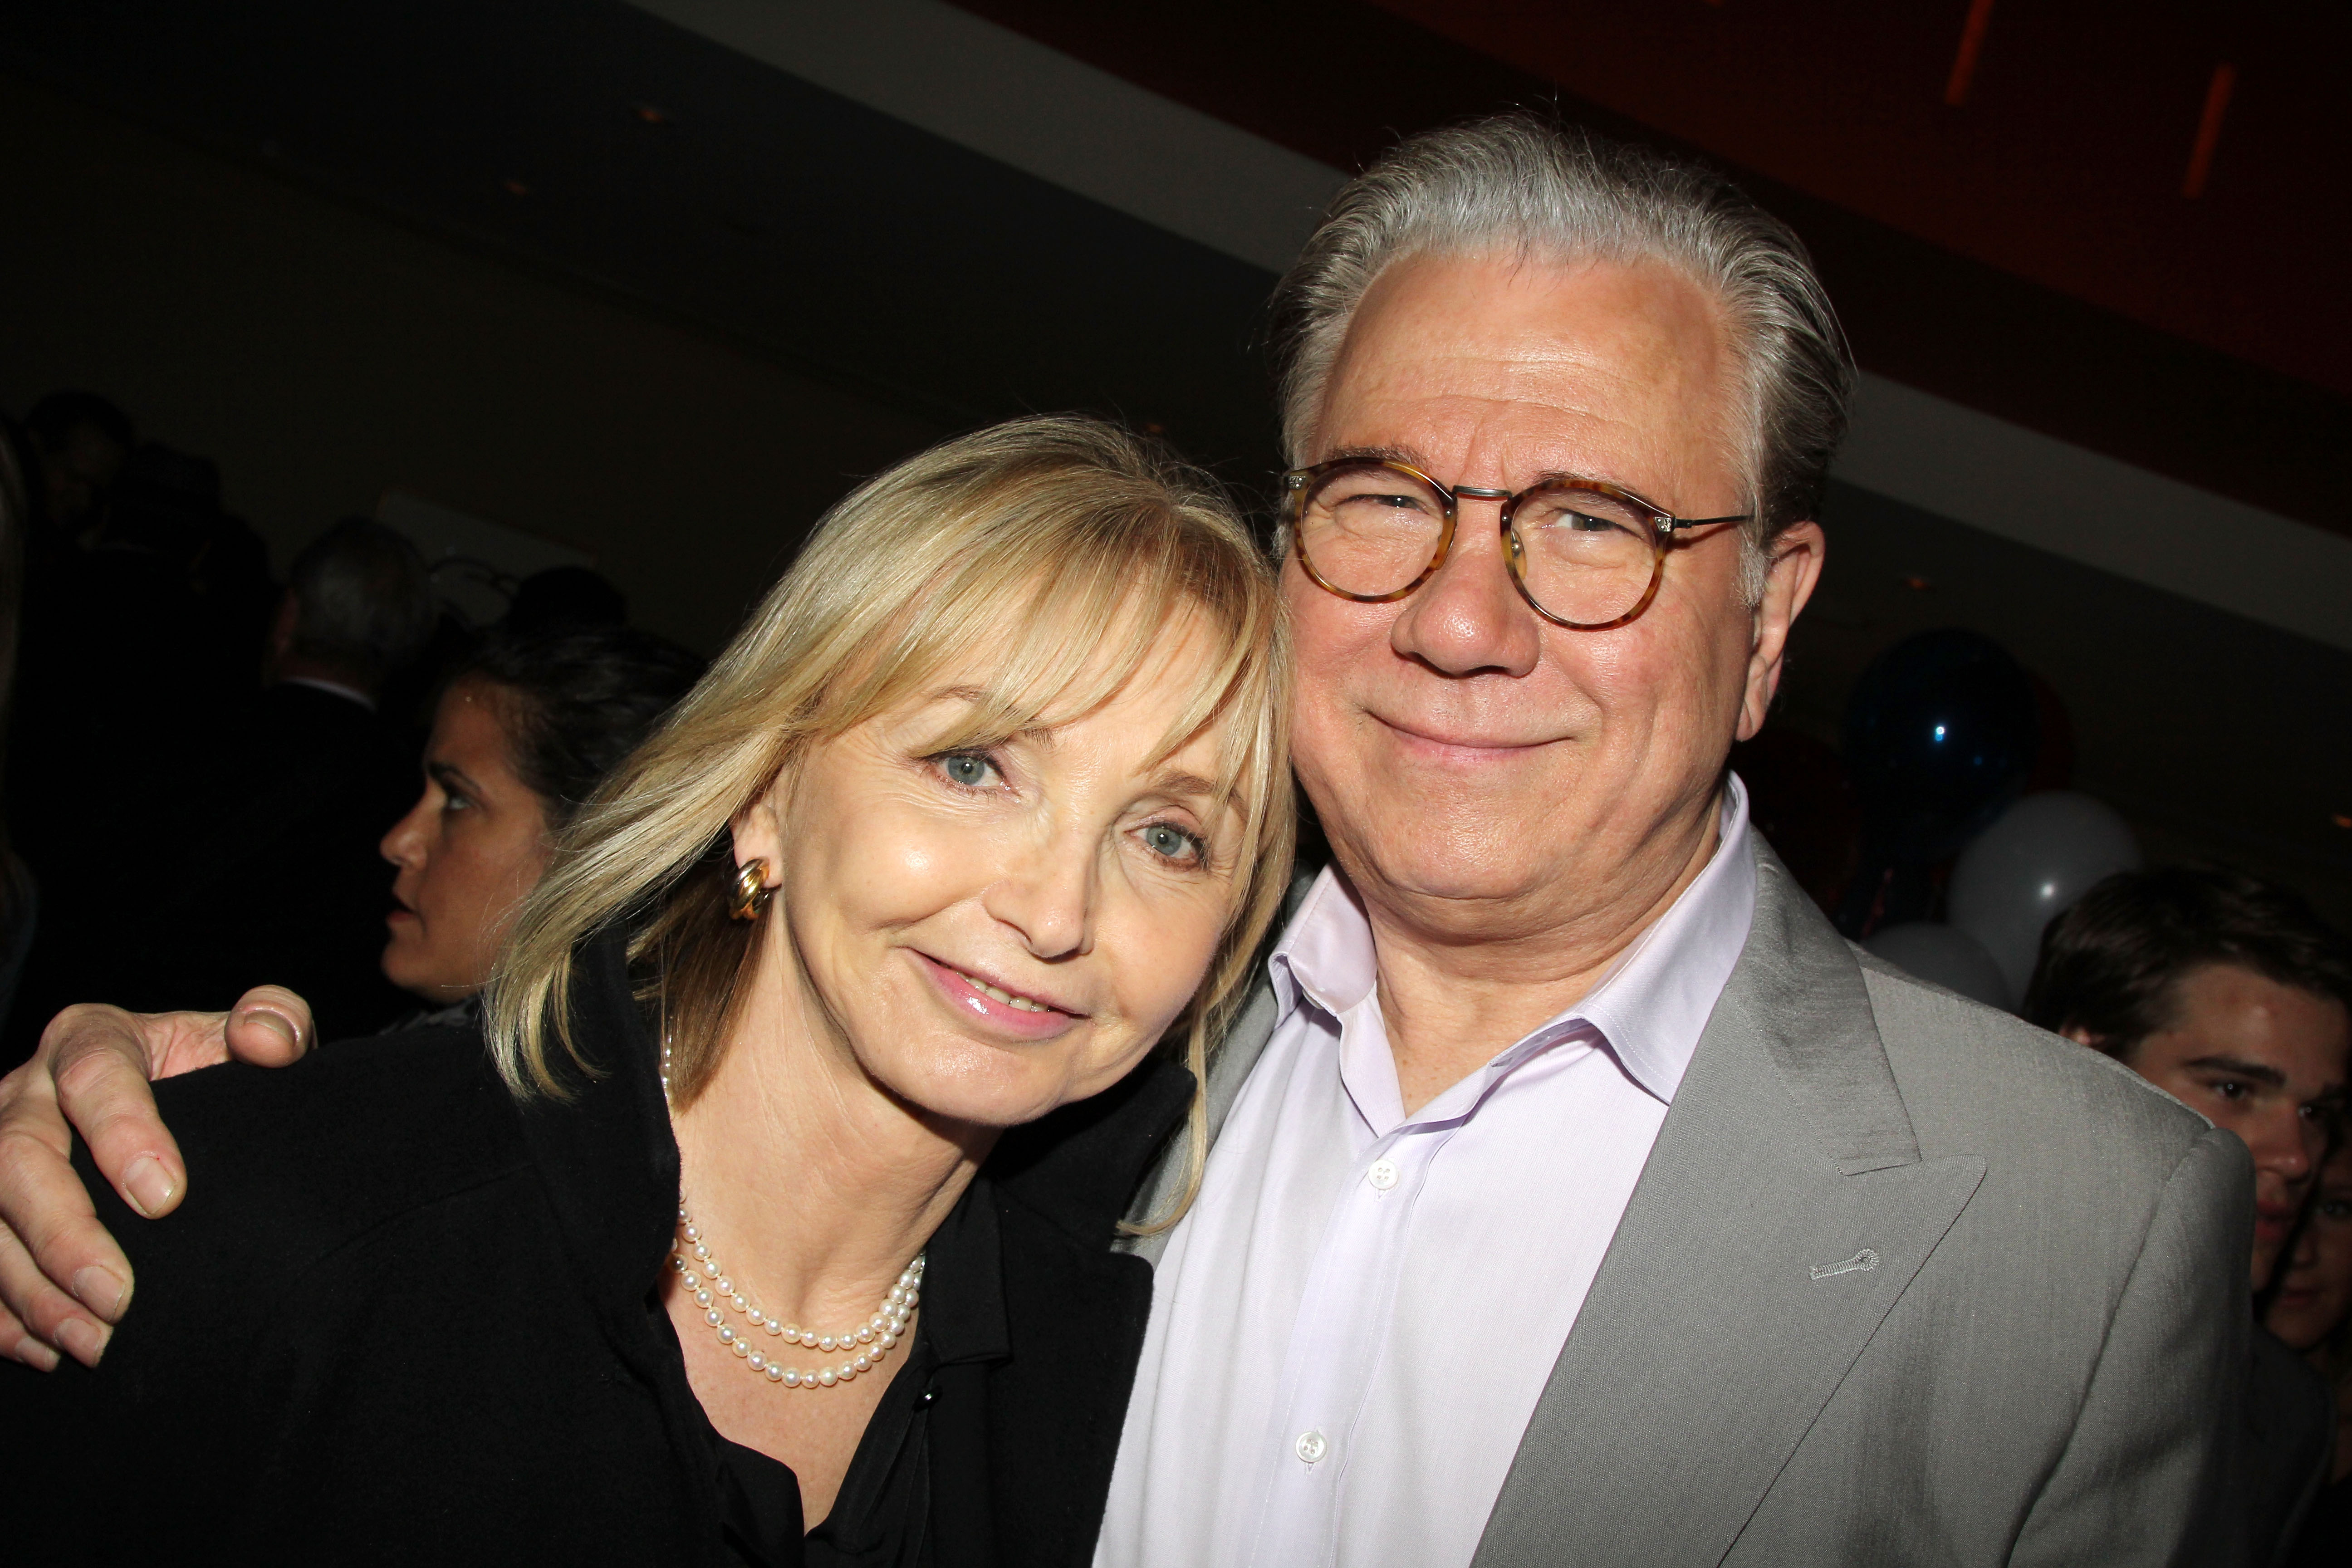 John Larroquette and Elizabeth Cookson at Gore Vidal's "The Best Man" Broadway opening night party in 2012. | Source: Getty Images